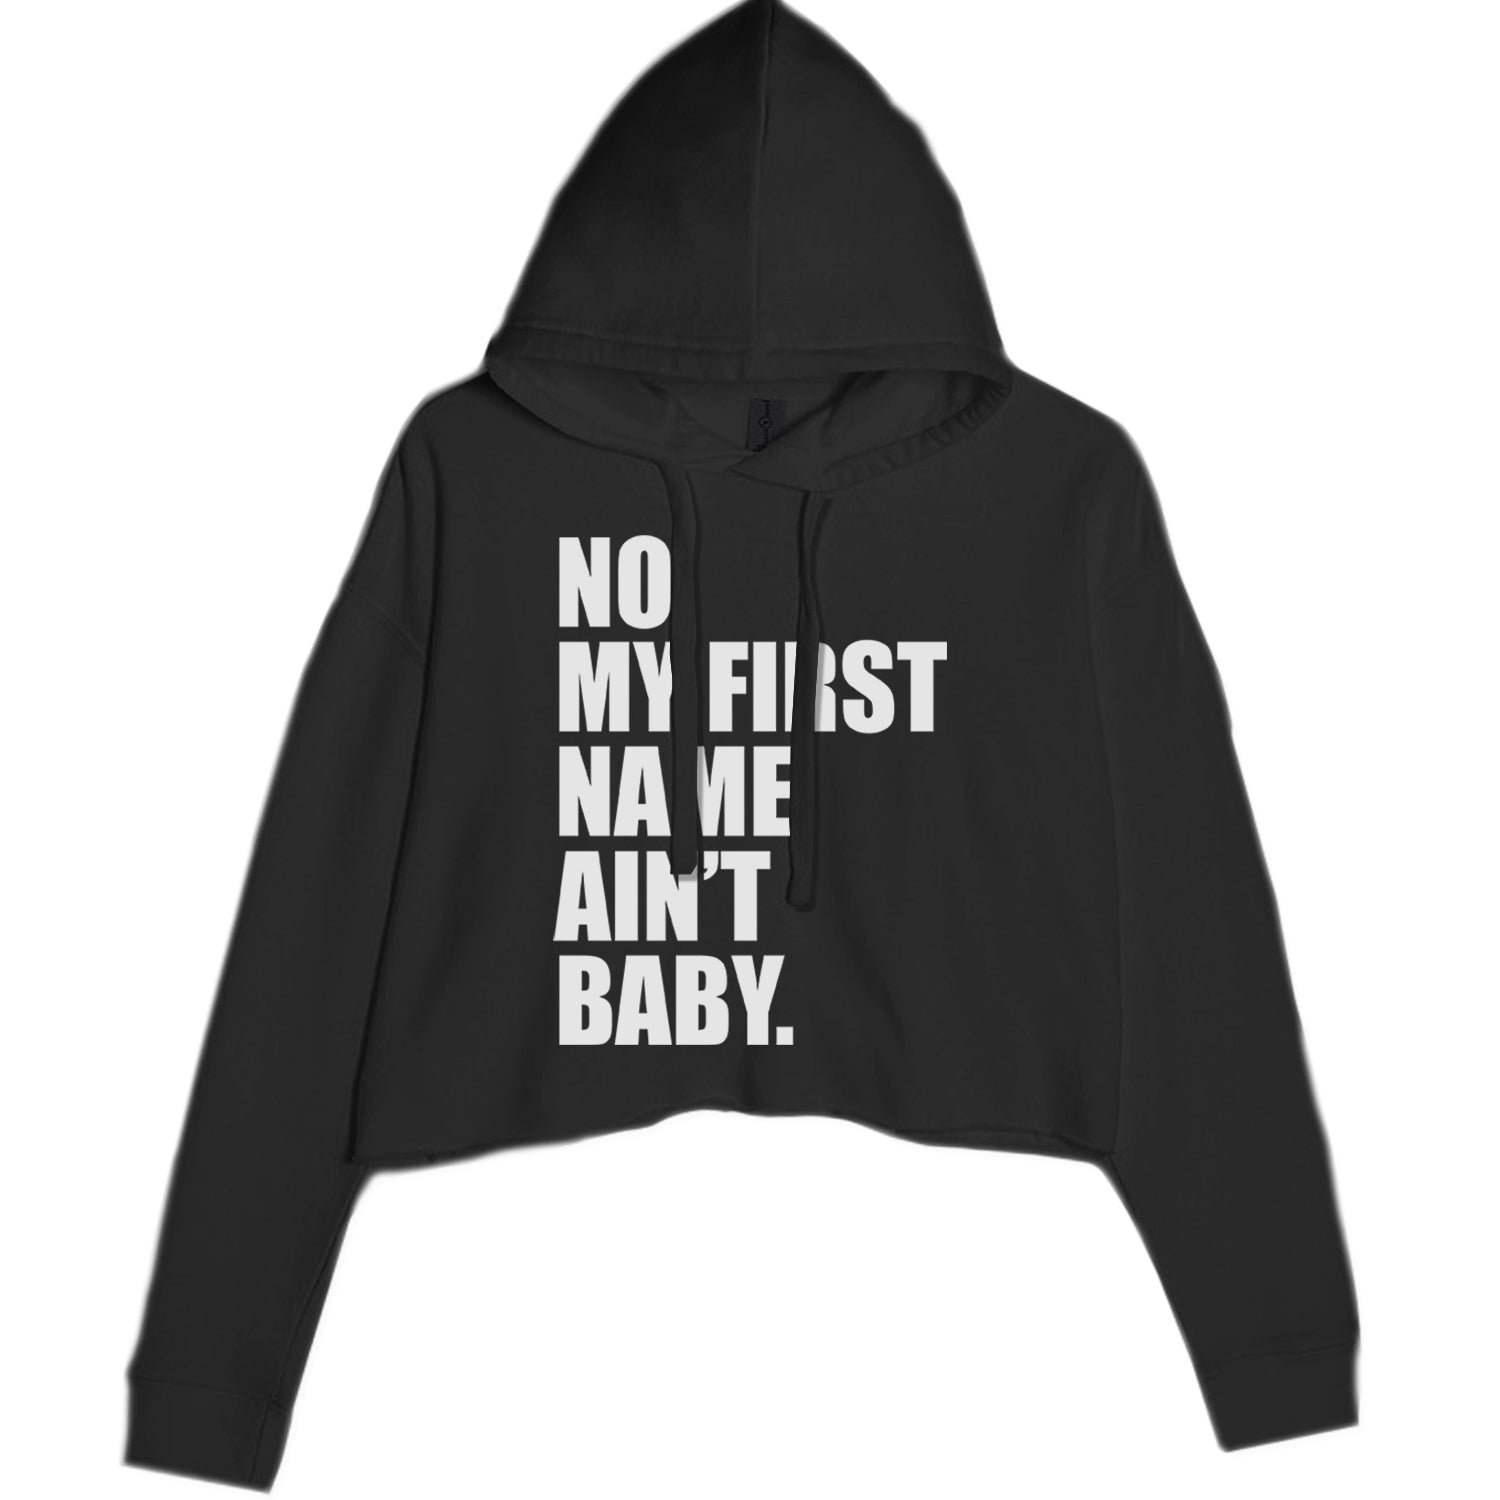 No My First Name Ain't Baby Together Again Cropped Hoodie Sweatshirt